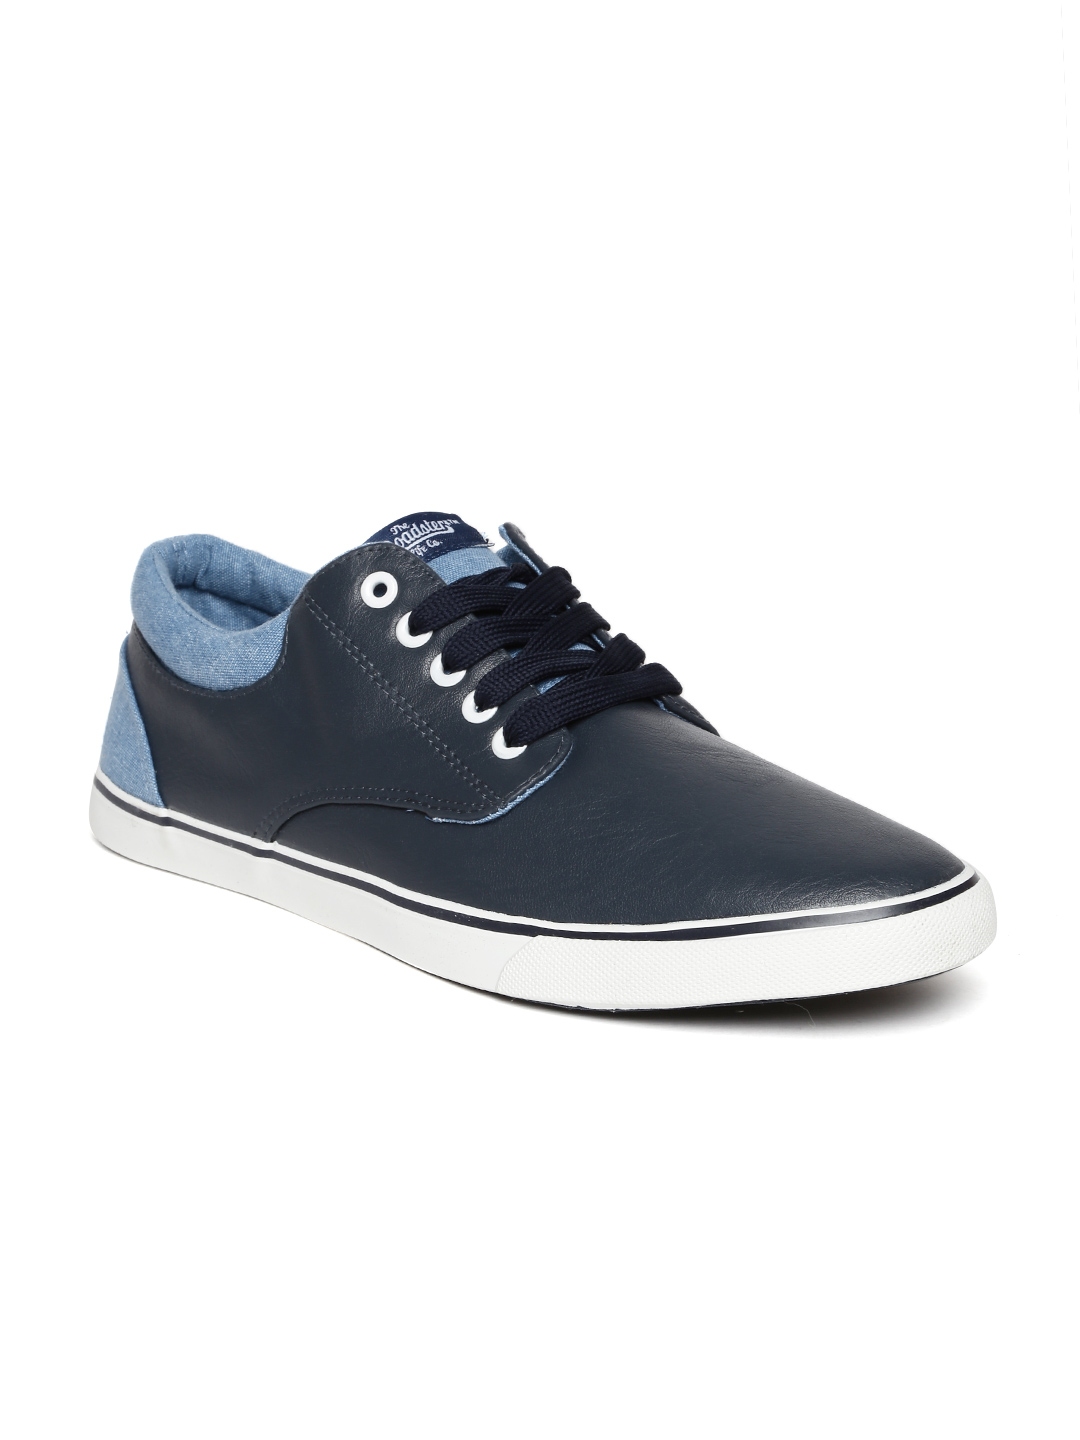 Buy Roadster Men Navy Casual Shoes - Casual Shoes for Men 1234887 | Myntra